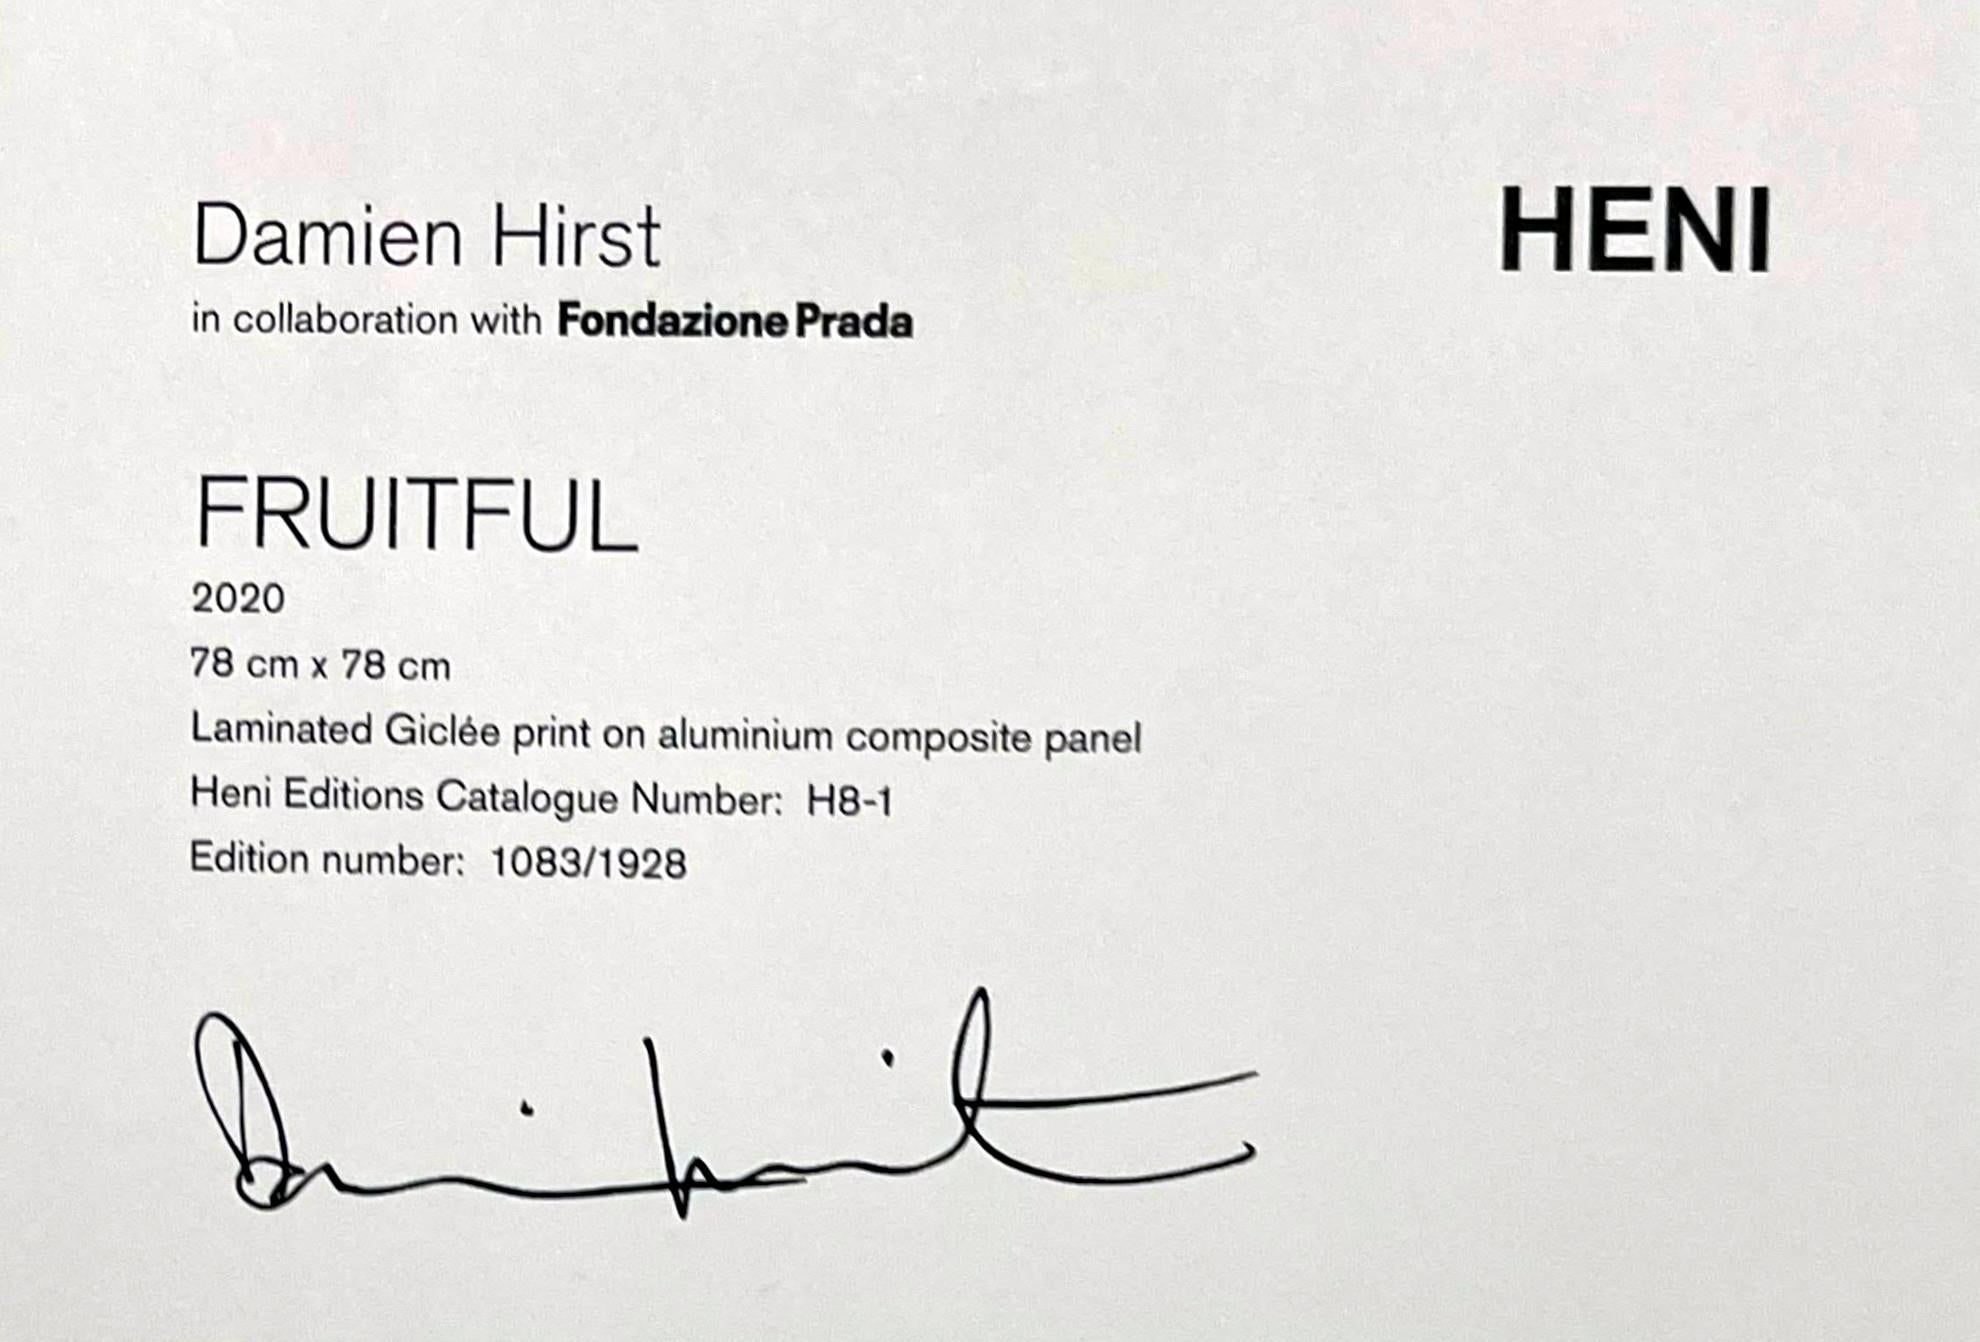 Damien Hirst
Fruitful (Large) H8-1, 2020
Laminated Giclée print on aluminium composite panel
Signed in plate, sticker label, Label with Damien Hirst's plate (digital) signature and edition number affixed to the back of the metal
30 7/10 × 30 7/10